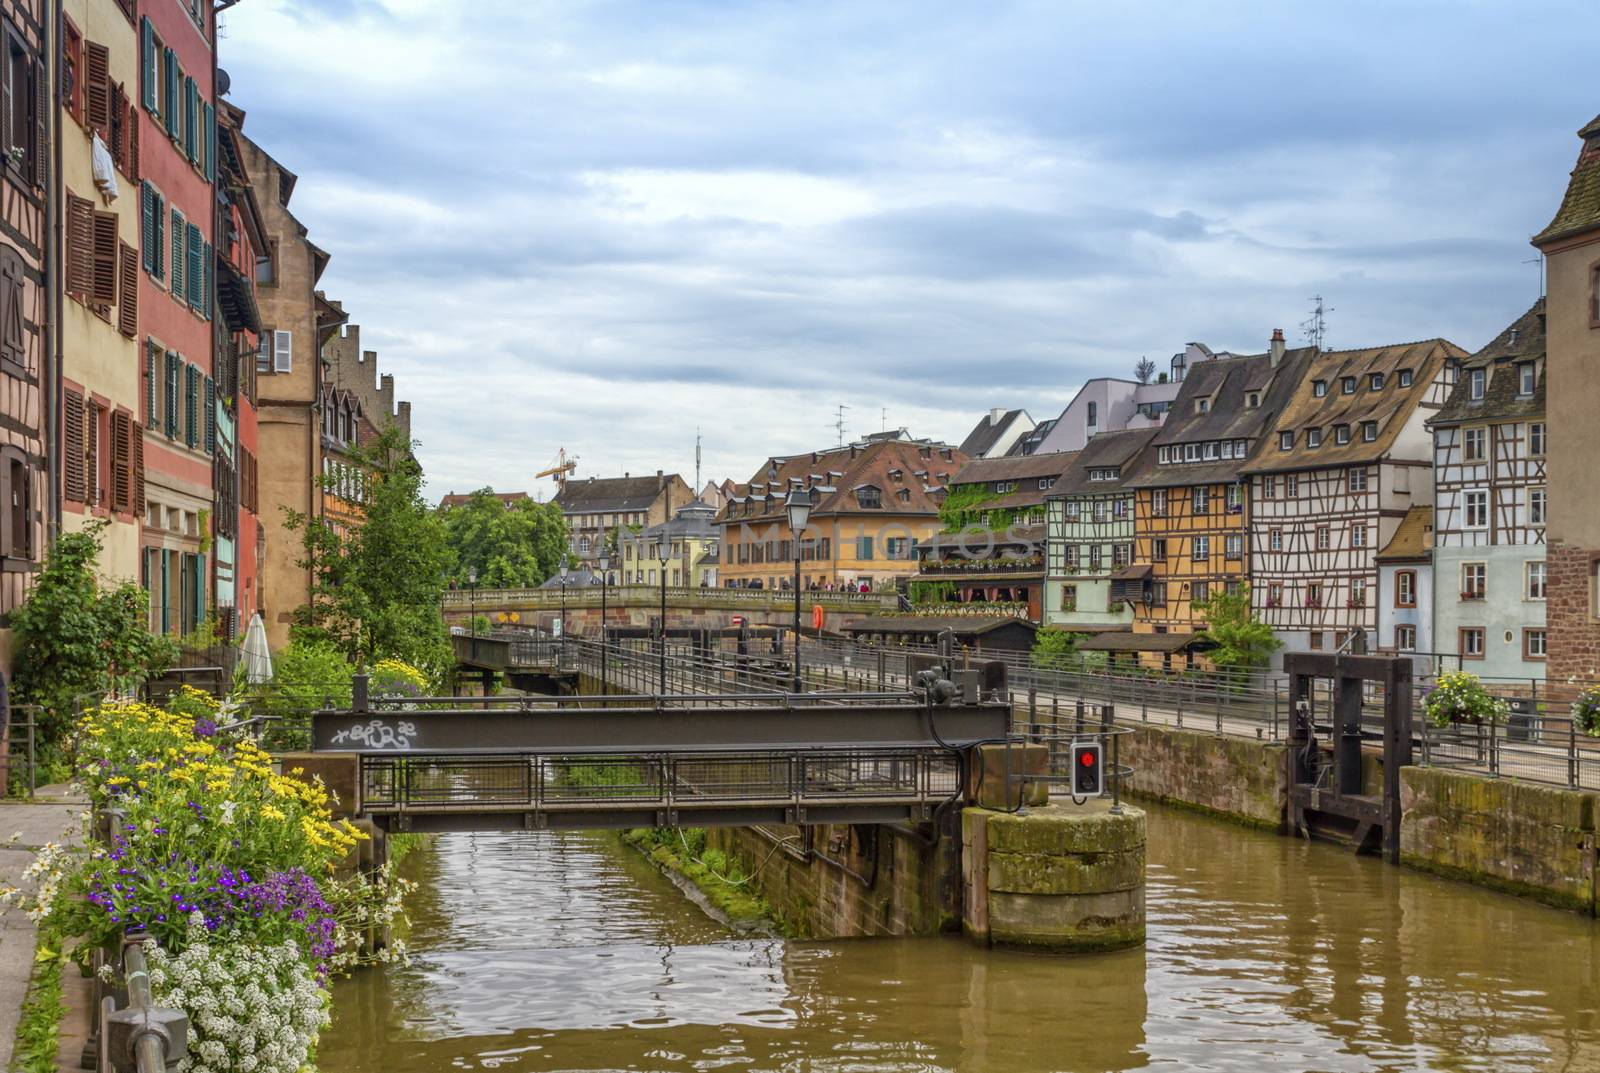 Traditional Alsatian half-timbered houses and canal in Petite France, Strasbourg, France